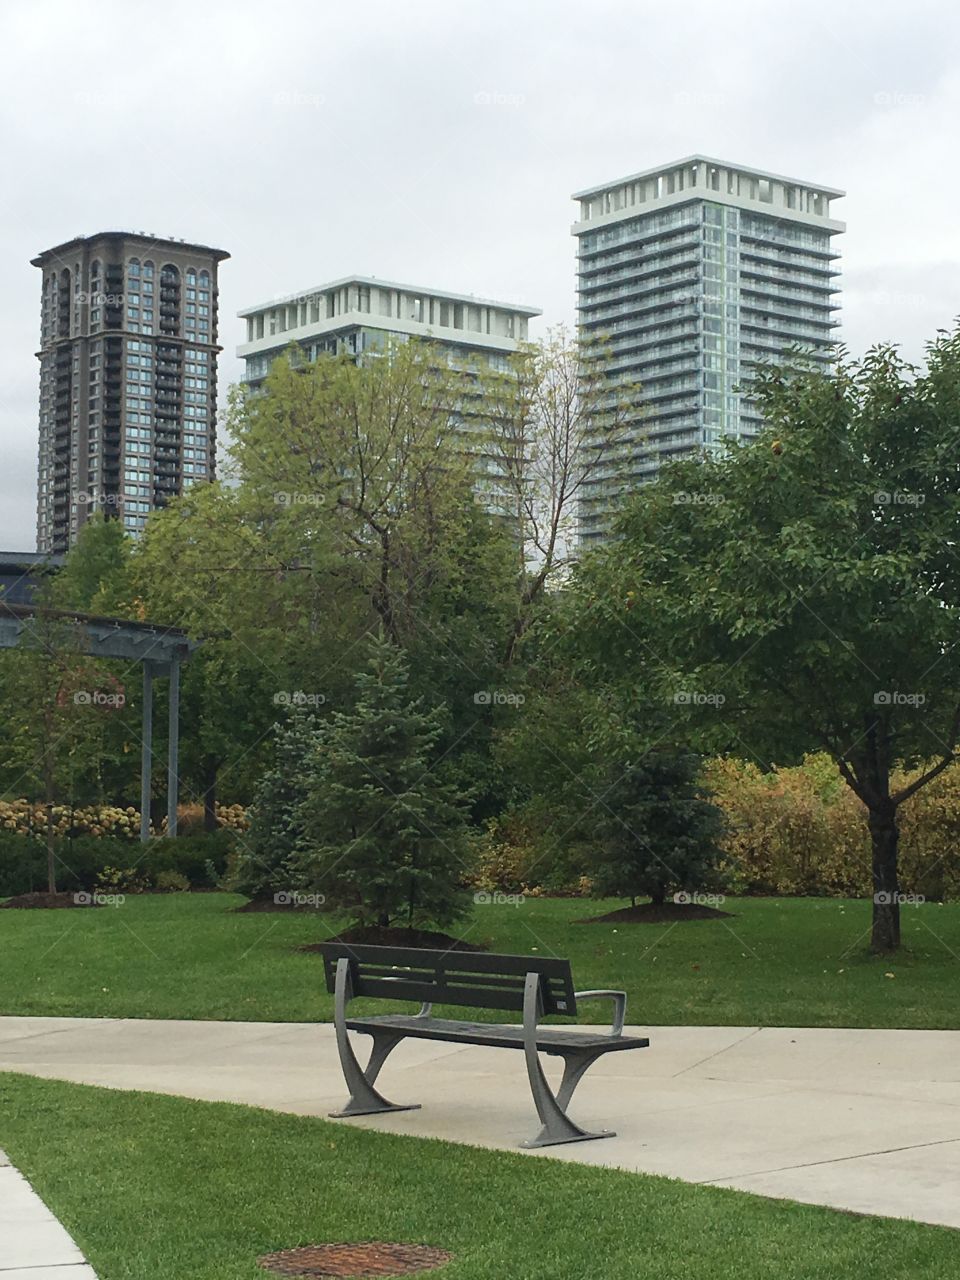 Bench, park and buildings